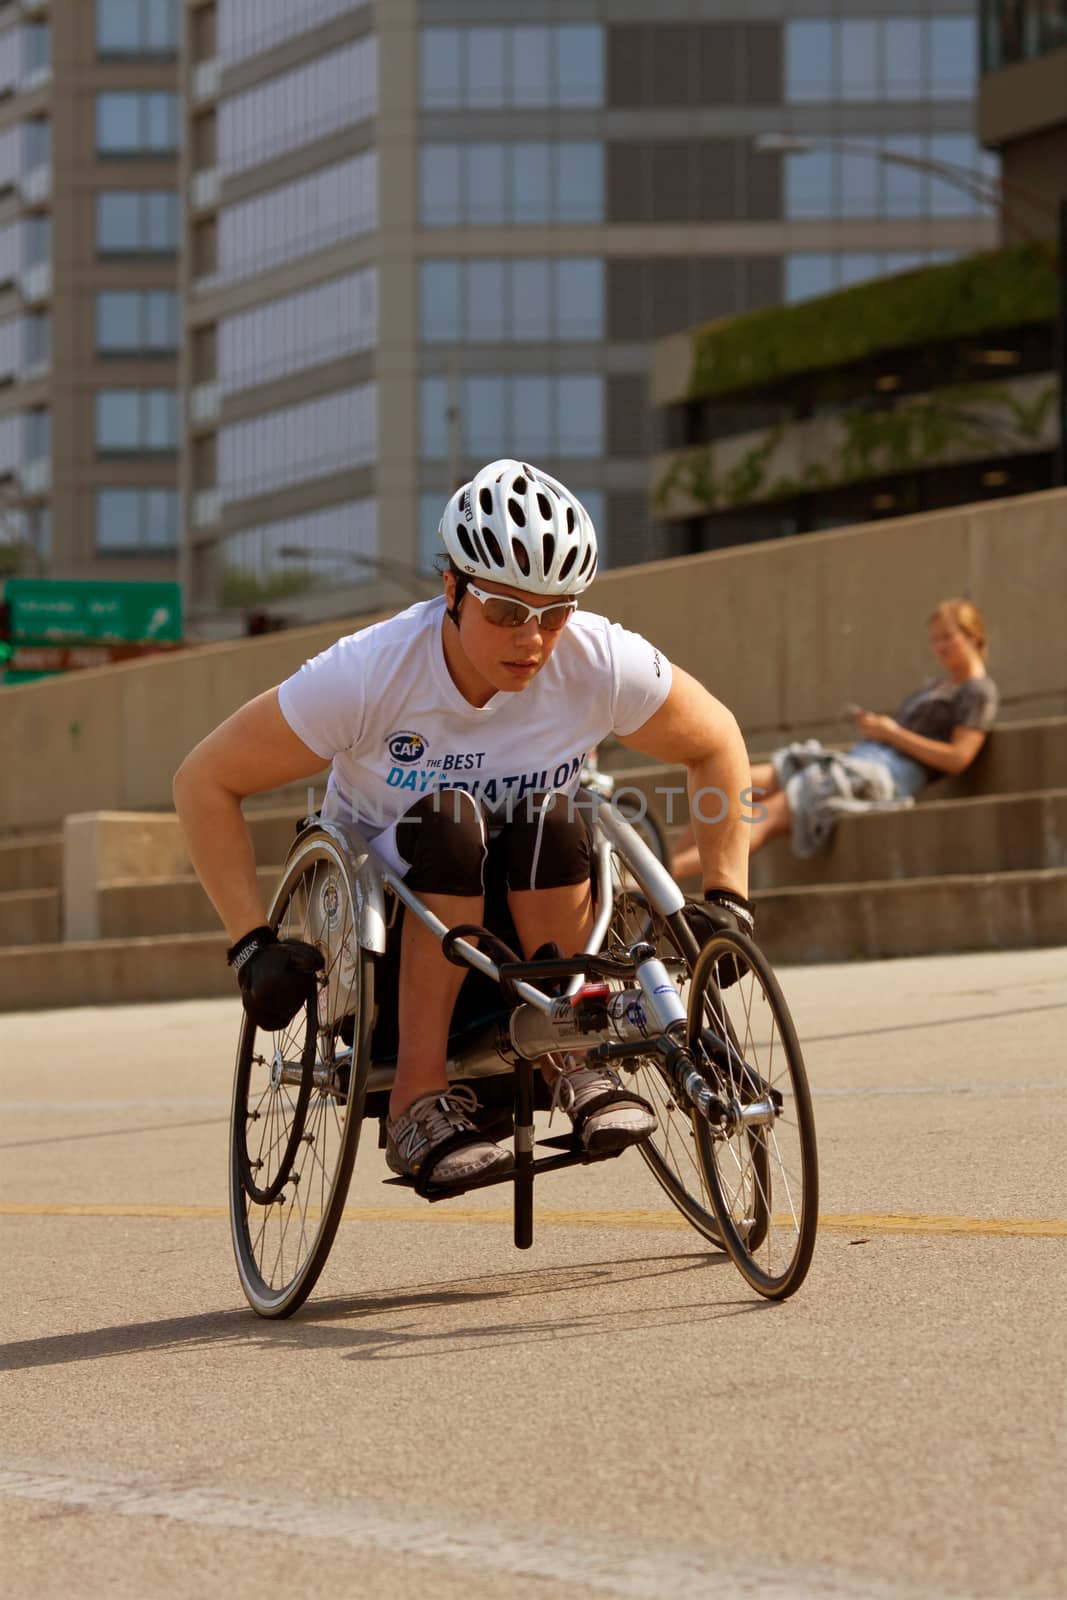 CHICAGO, IL - MAY 26, 2012:  An unidentified female in a racing wheelchair works out on an asphalt recreational area that runs alongside Chicago's famous Lakeshore Drive.  The warm weather brought many locals and tourists outside to enjoy the long Memorial Day weekend and to kickoff summer.